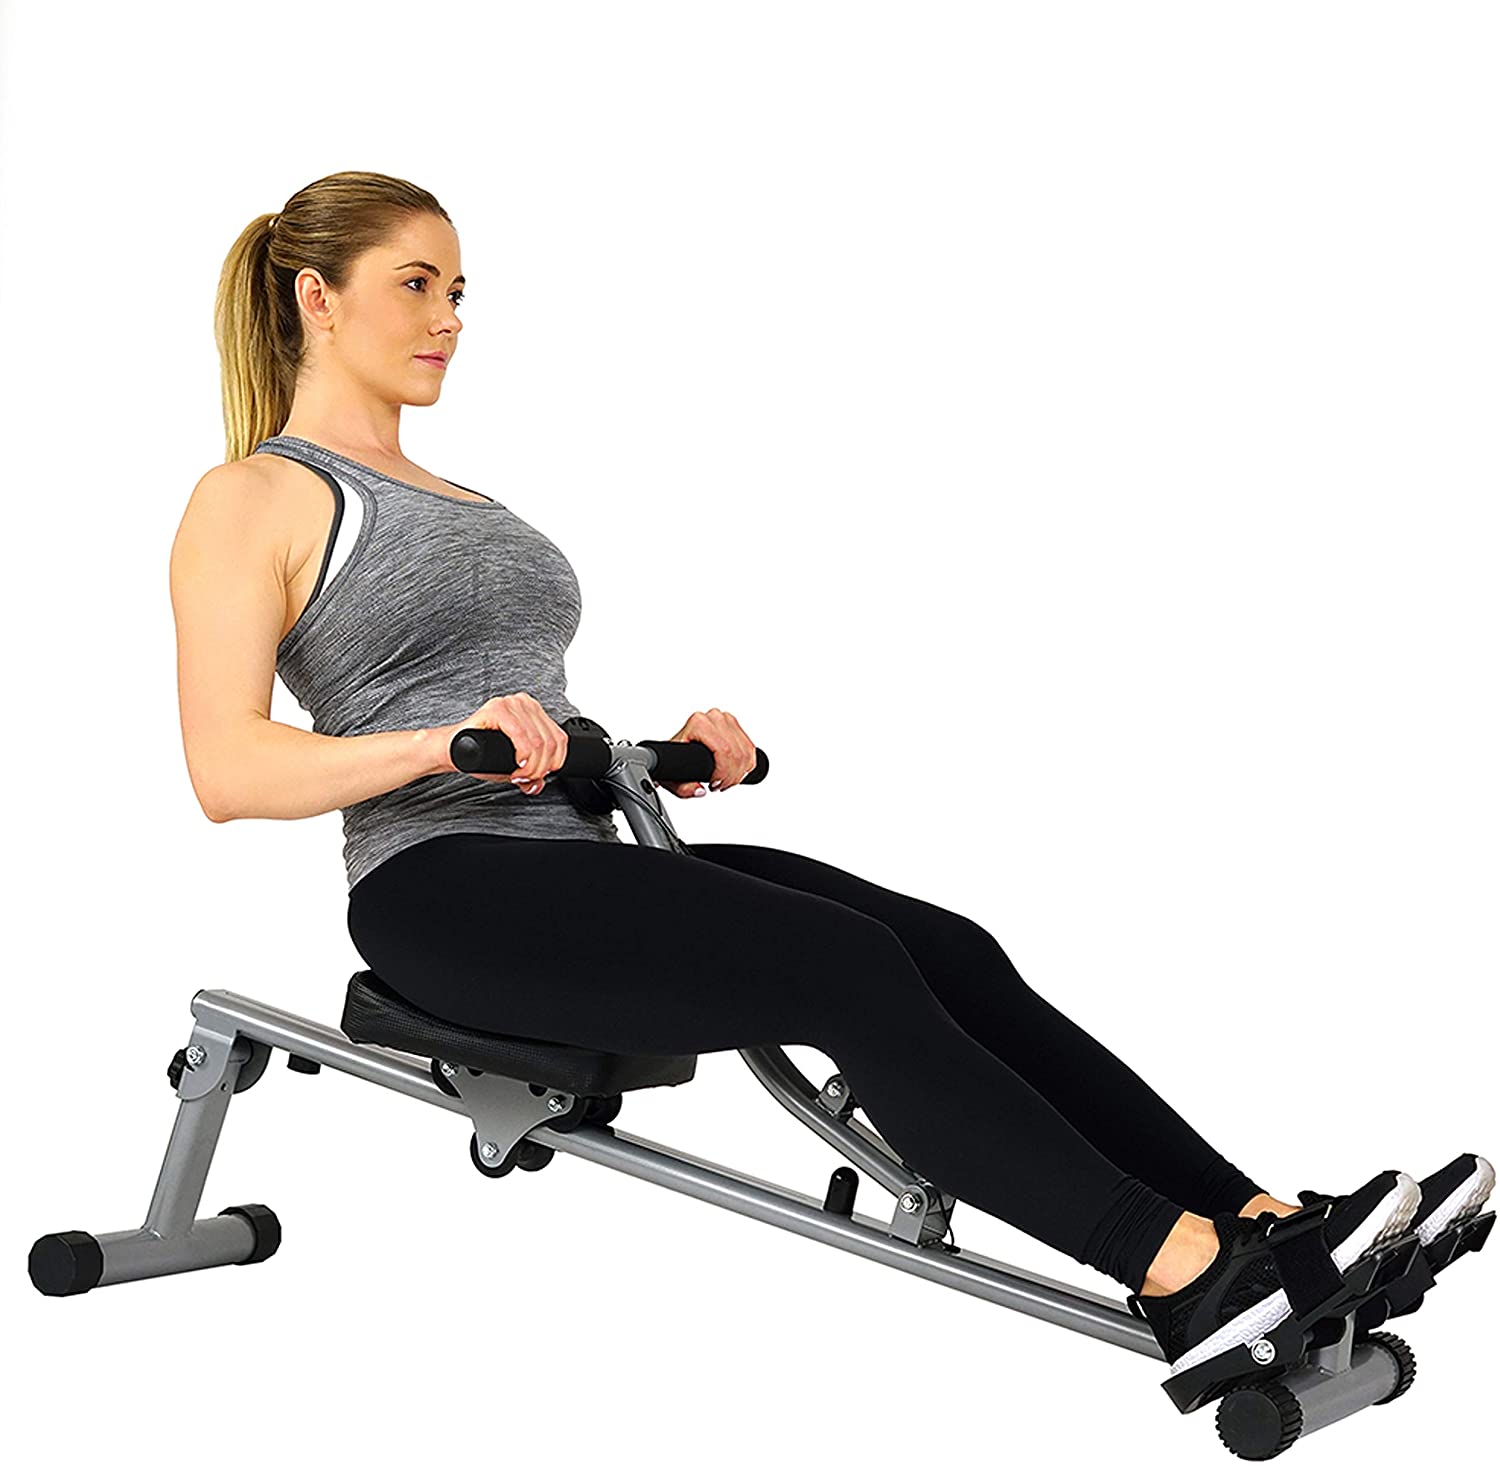 Sunny Health & Fitness SF-RW1205 Rowing Machine Rower with 12 Level Adjustable Resistance, Digital Monitor, and 220 LB Max Weight